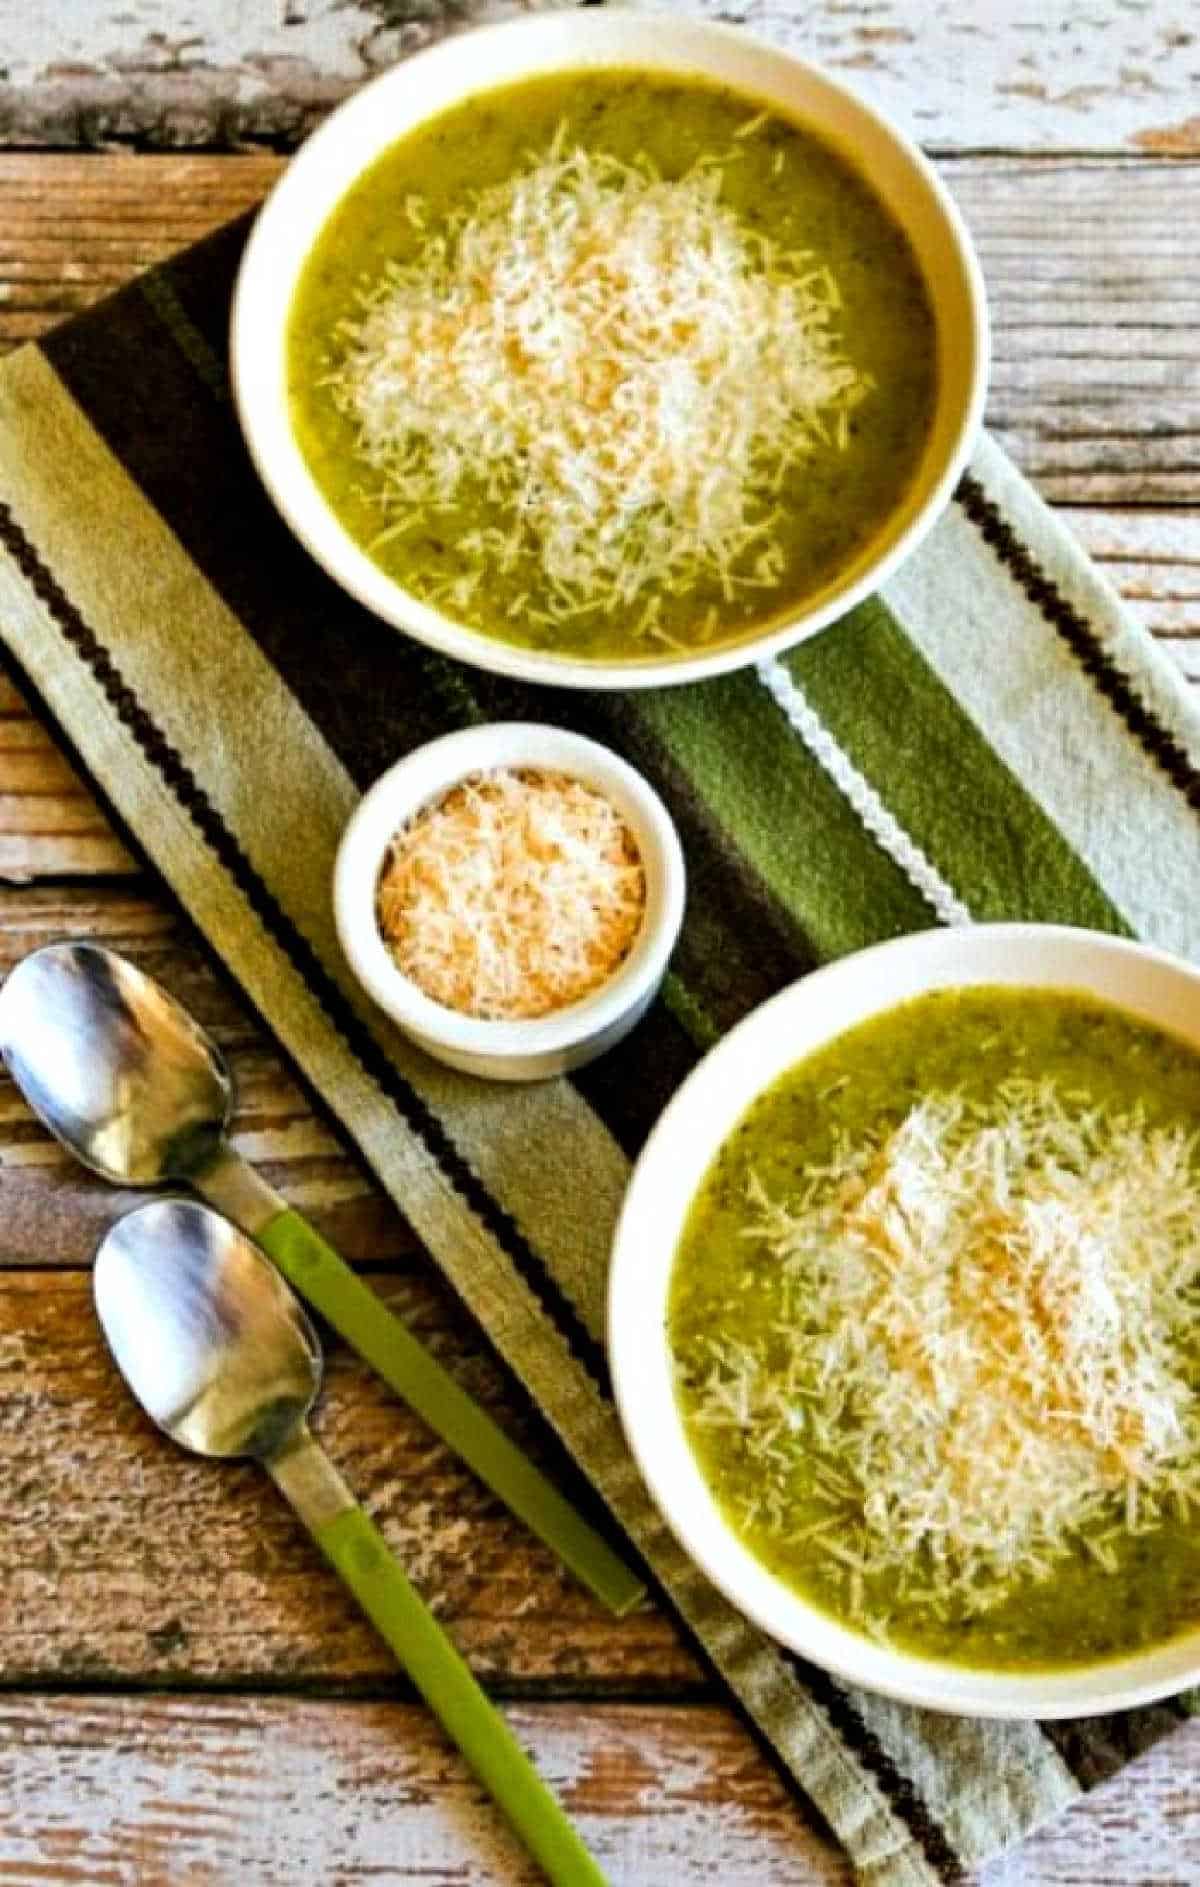 zucchini soup shown in two serving bowls with Parmesan cheese